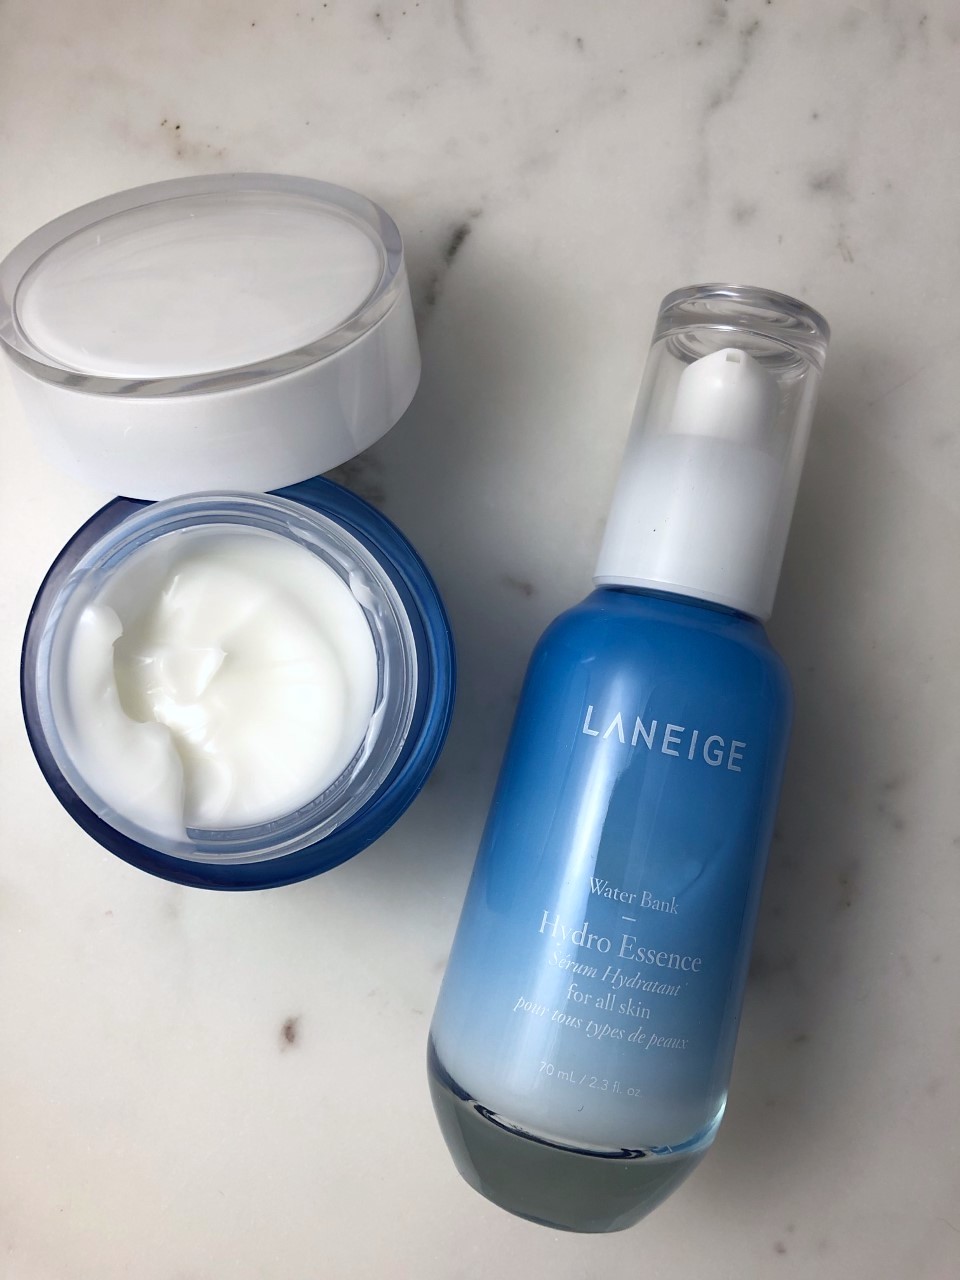 Laneige Water Bank Collection: A quick review